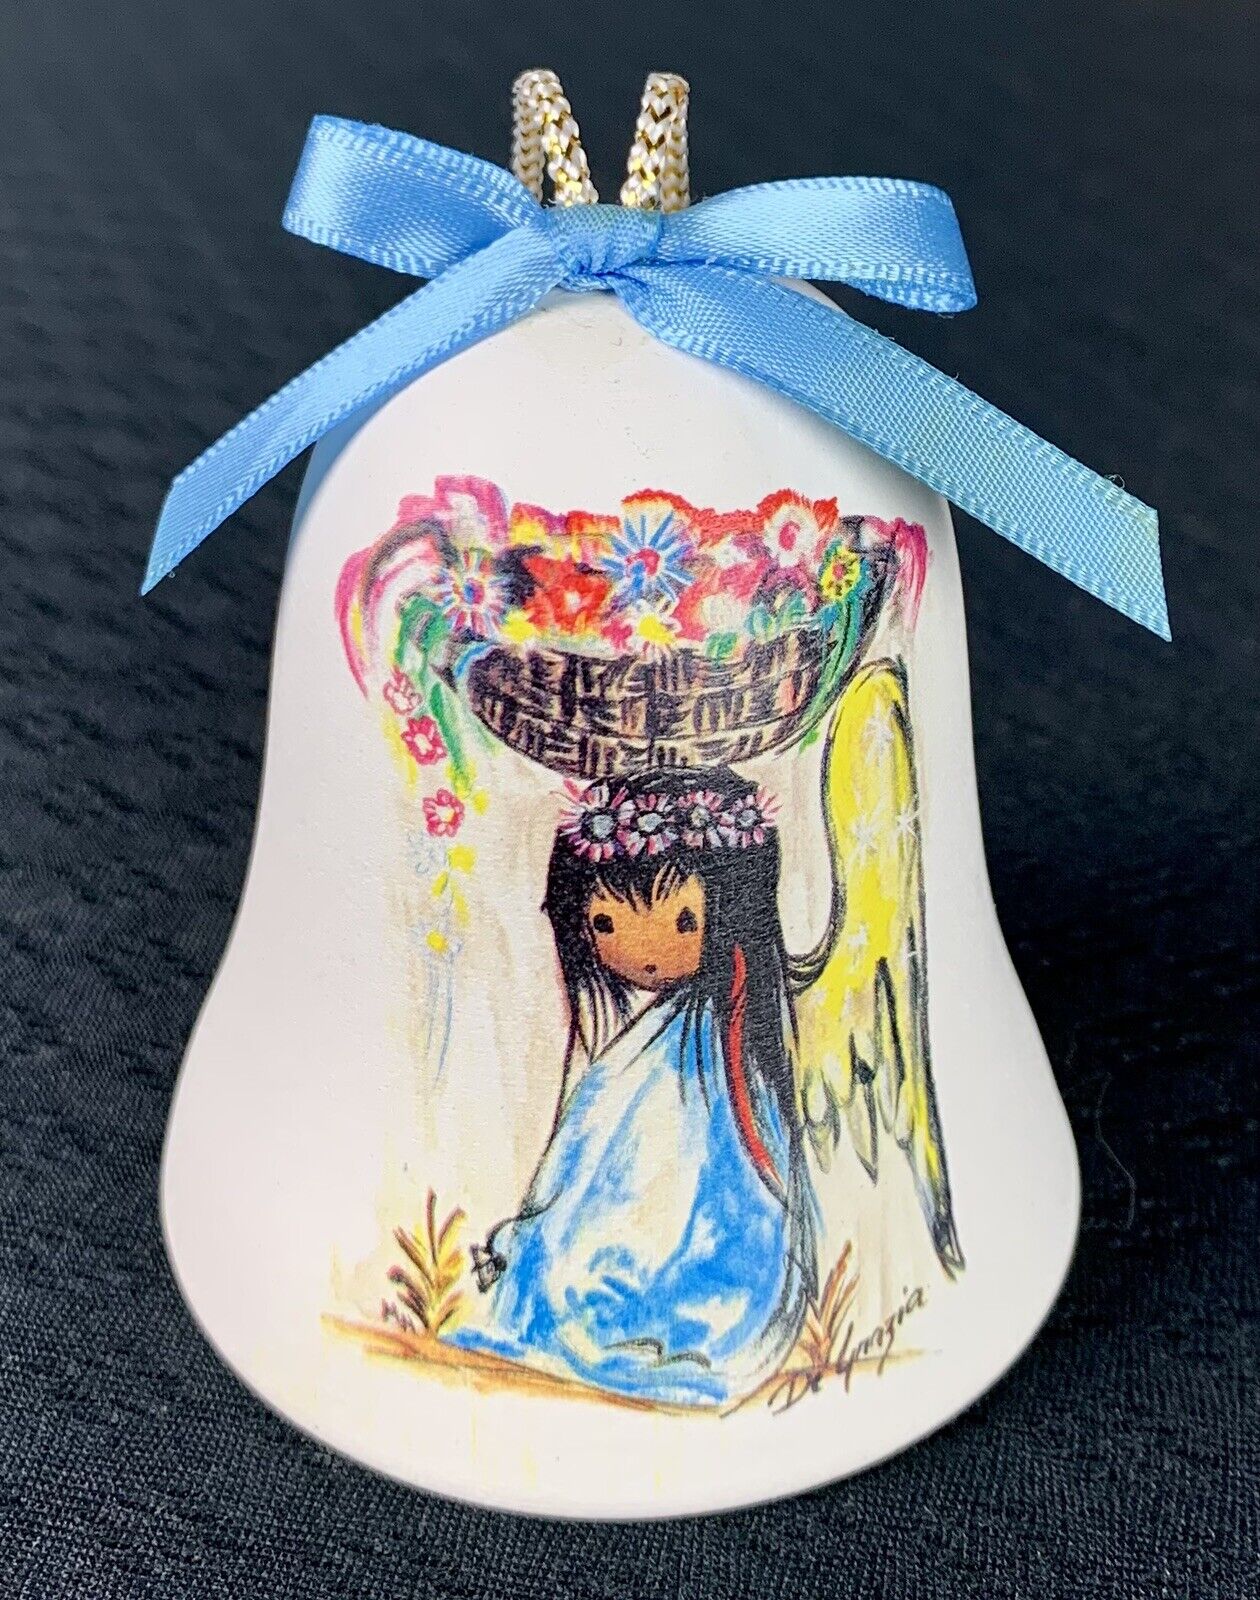 Degrazia Angel Bell Christmas Ornament - Ceramic, Limited Edition Vintage 1995